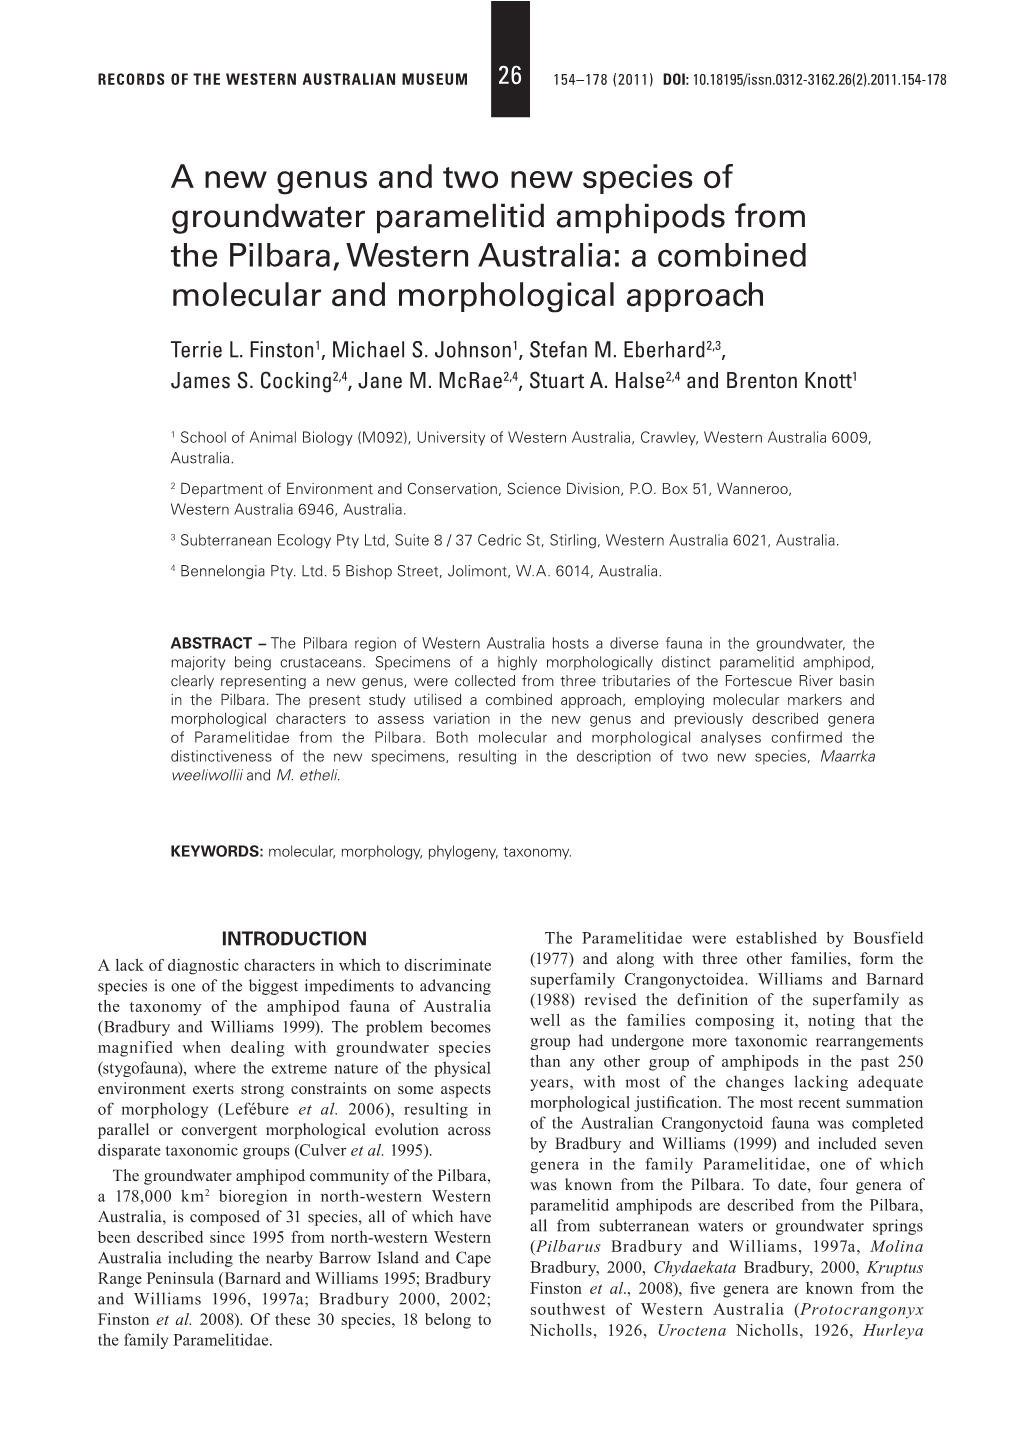 A New Genus and Two New Species of Groundwater Paramelitid Amphipods from the Pilbara, Western Australia: a Combined Molecular and Morphological Approach